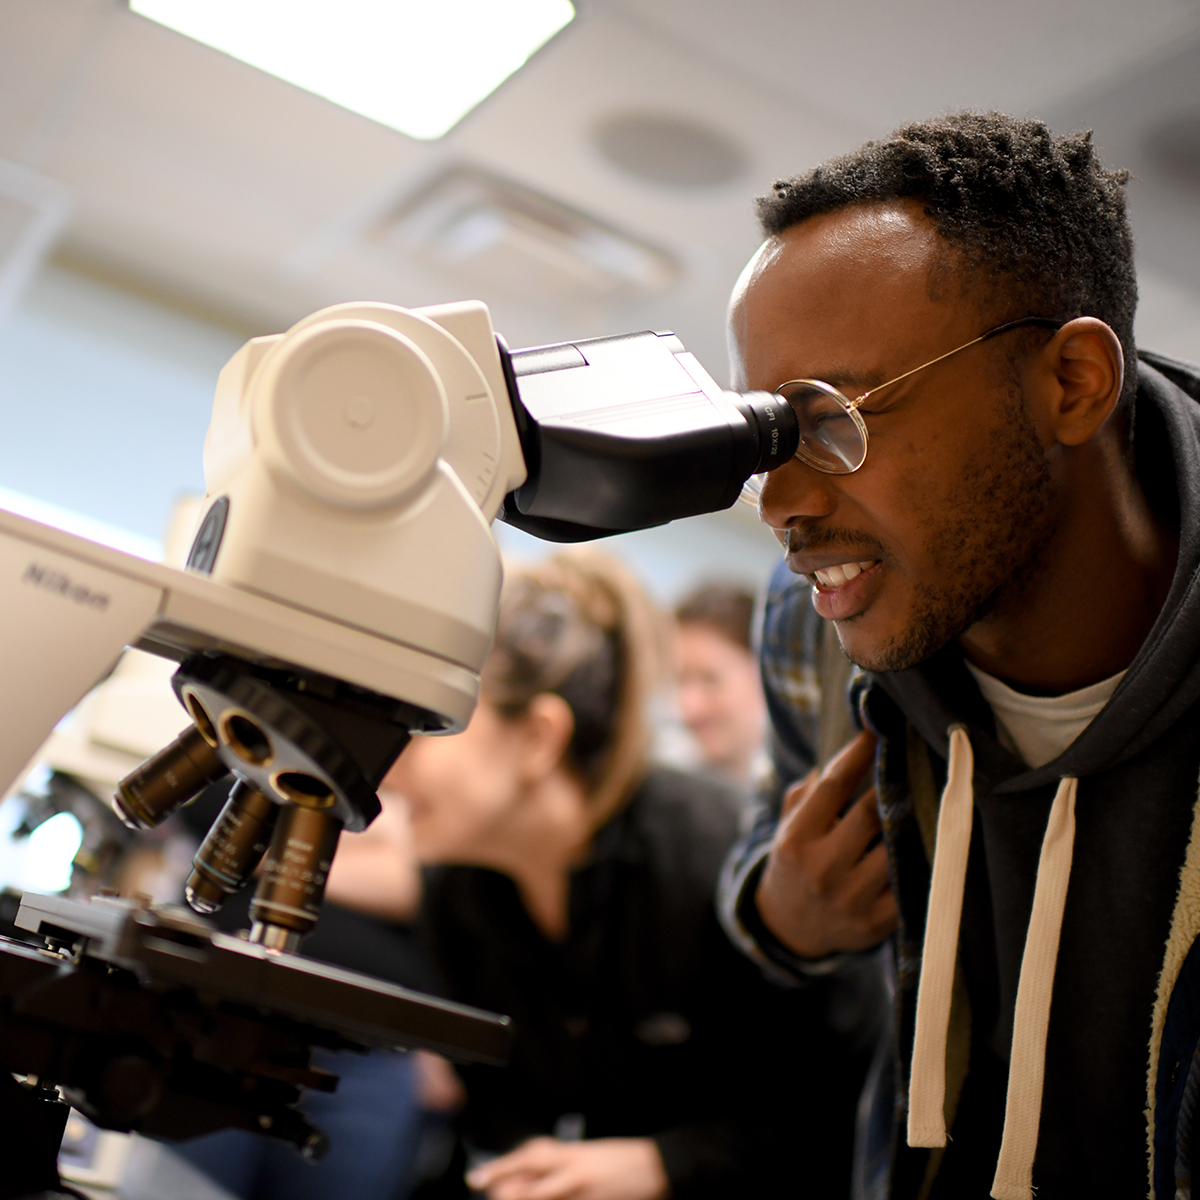 Student researcher reviews his research in the microscope